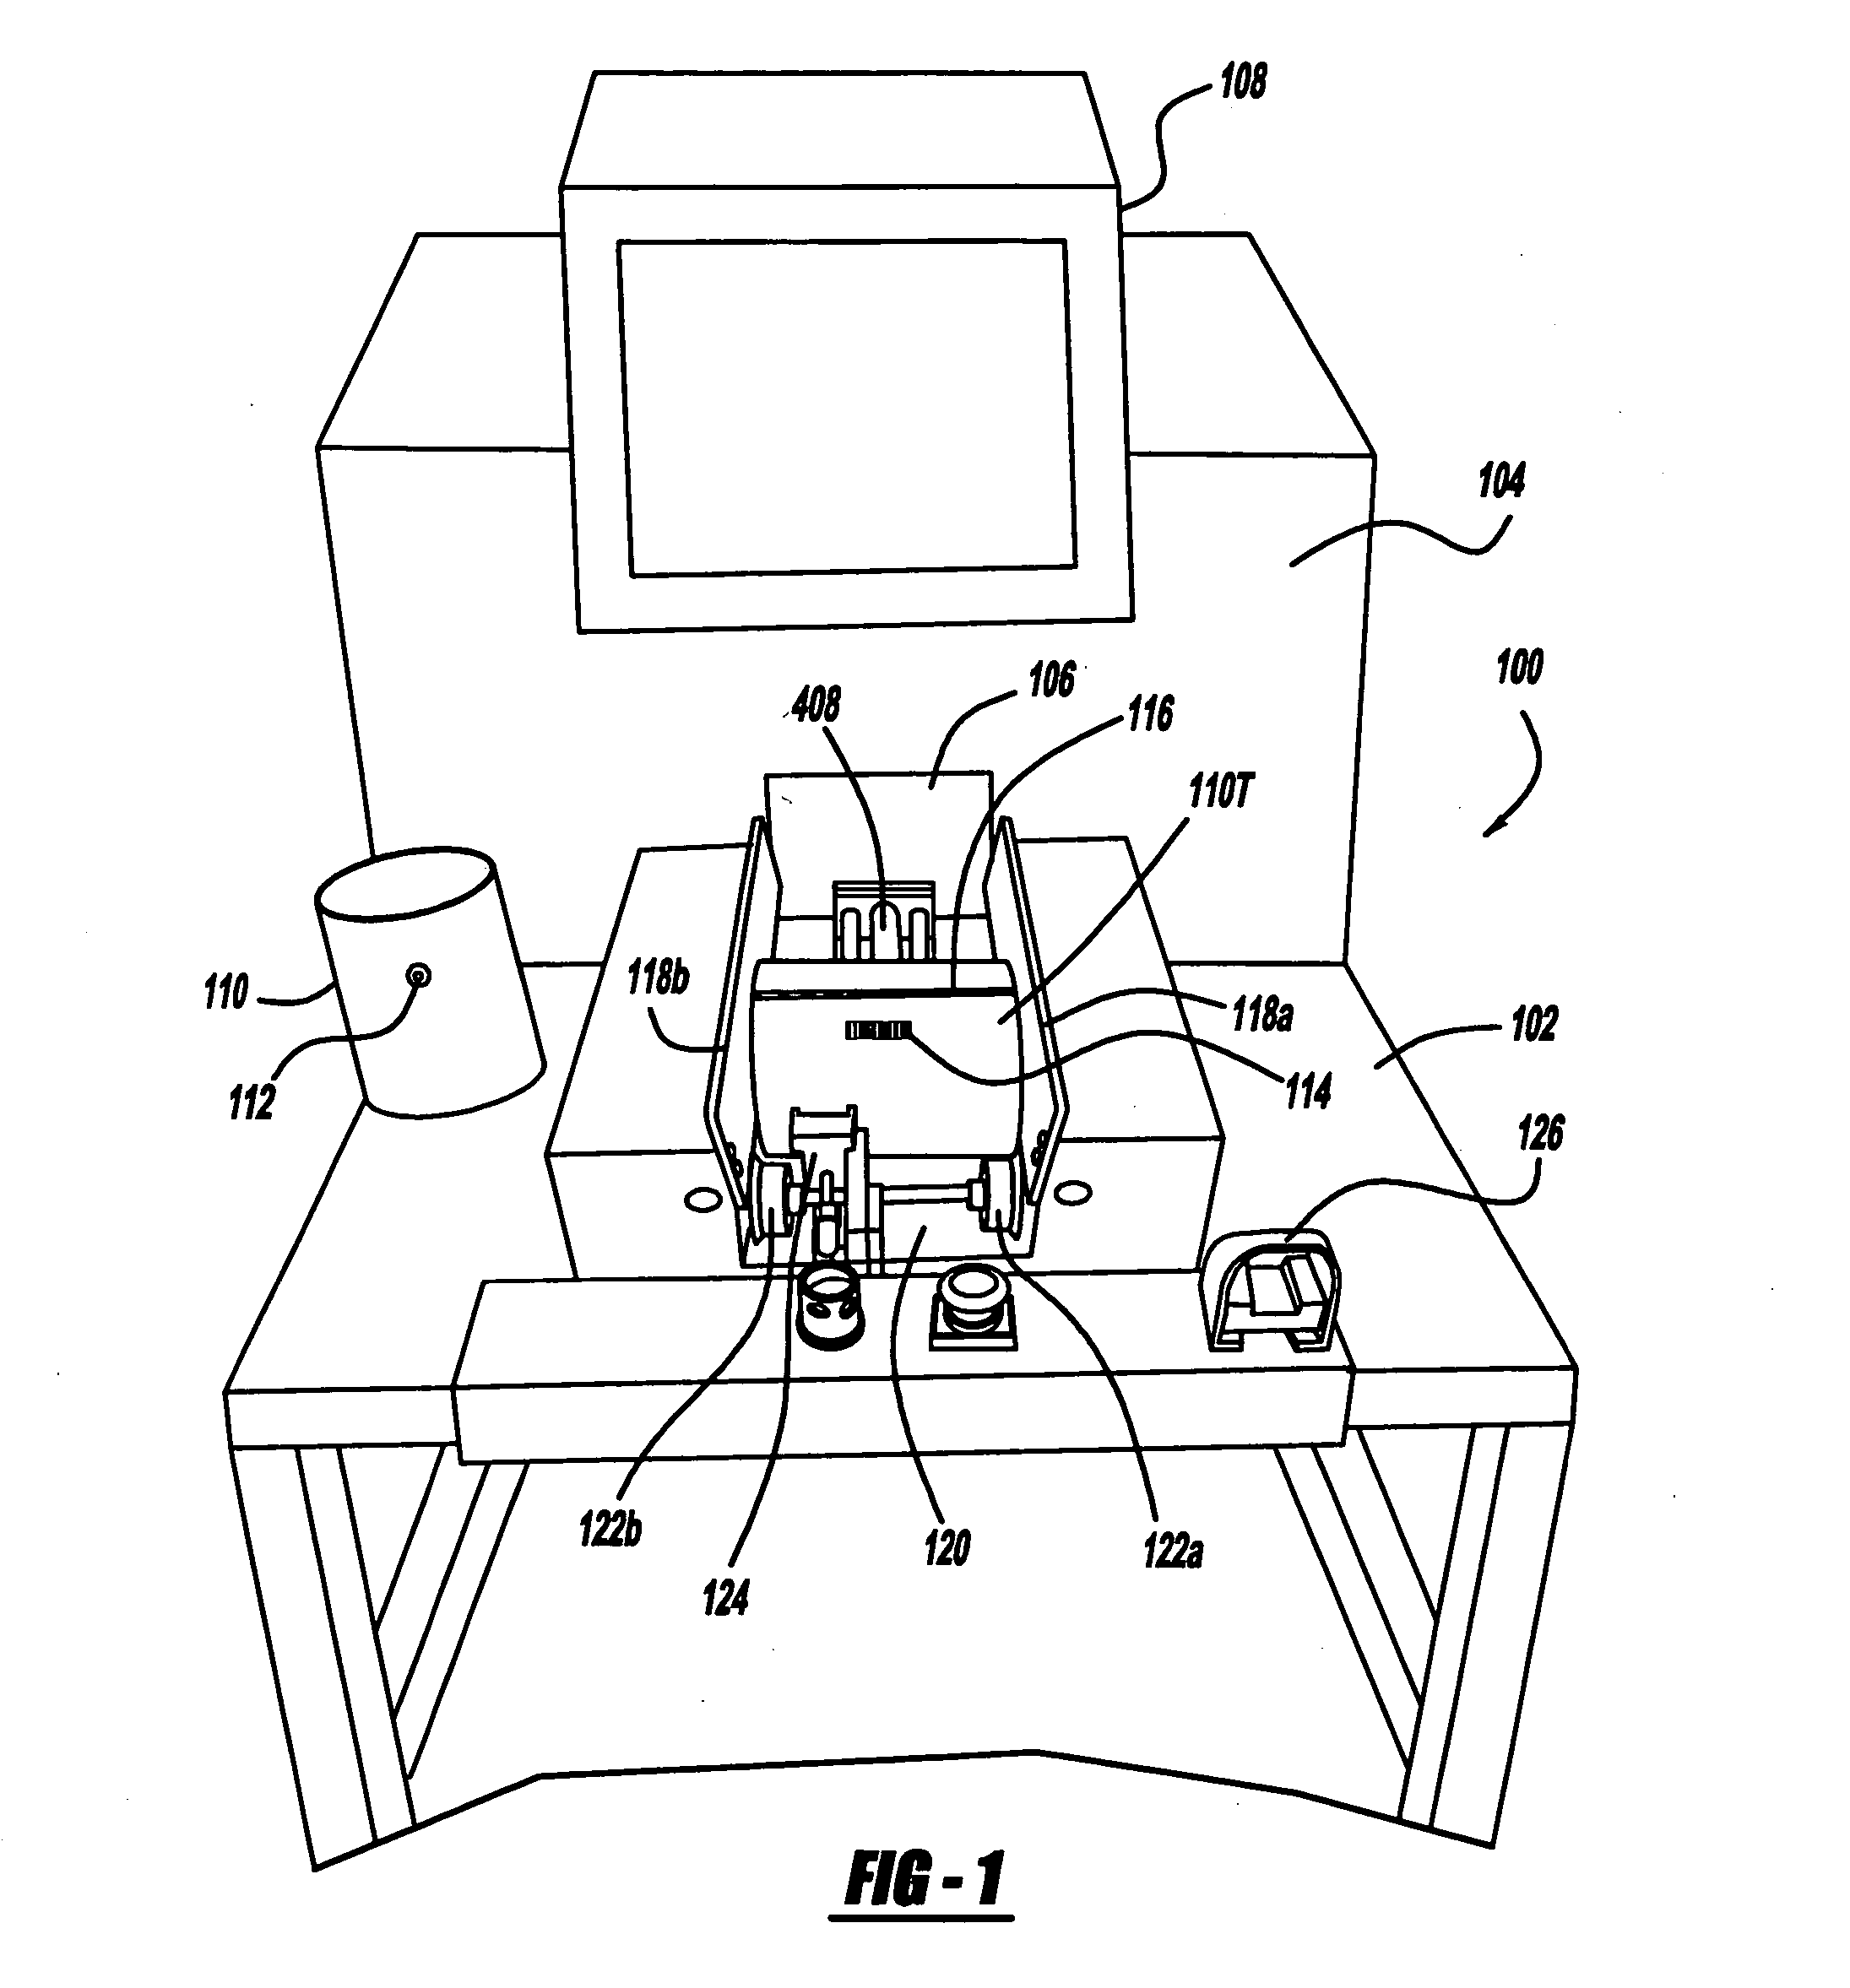 Apparatus and method for measuring gap bulk density of a catalytic converter support mat